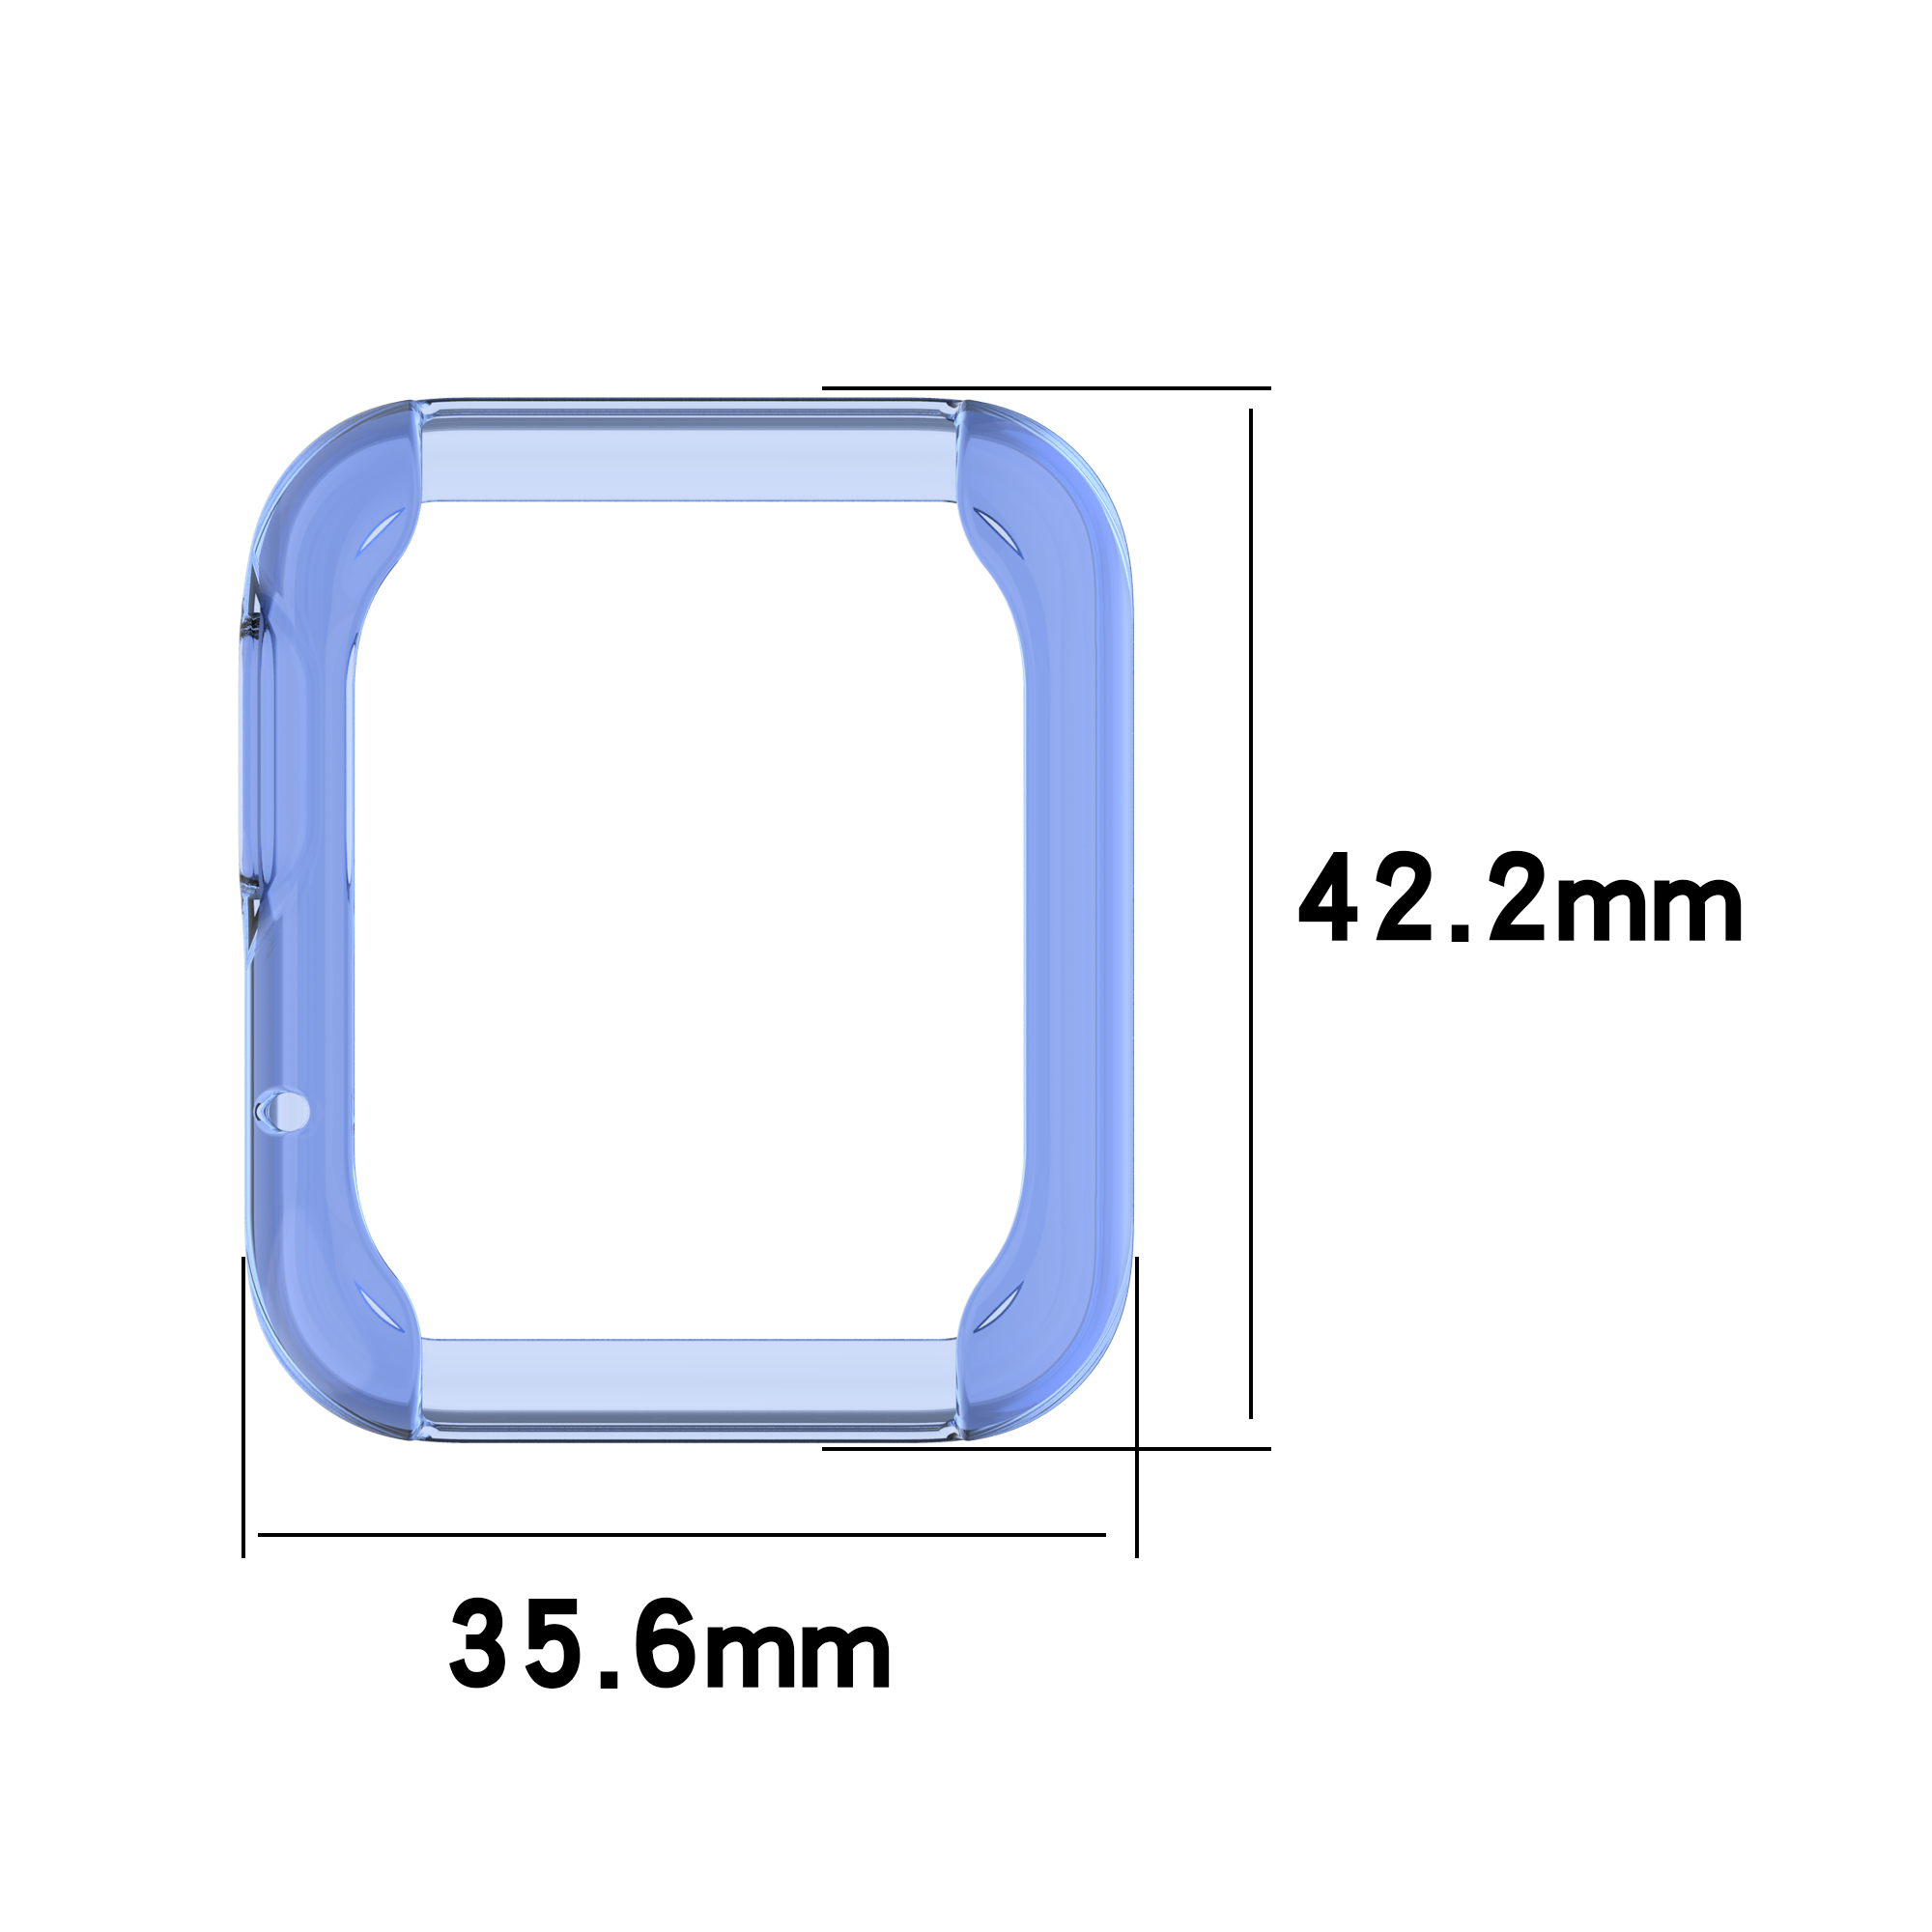 Bakeey-Transparent-TPU-Half-pack-Watch-Case-Cover-Watch-Protector-For-Xiaomi-Mi-Watch-Lite-1819481-3